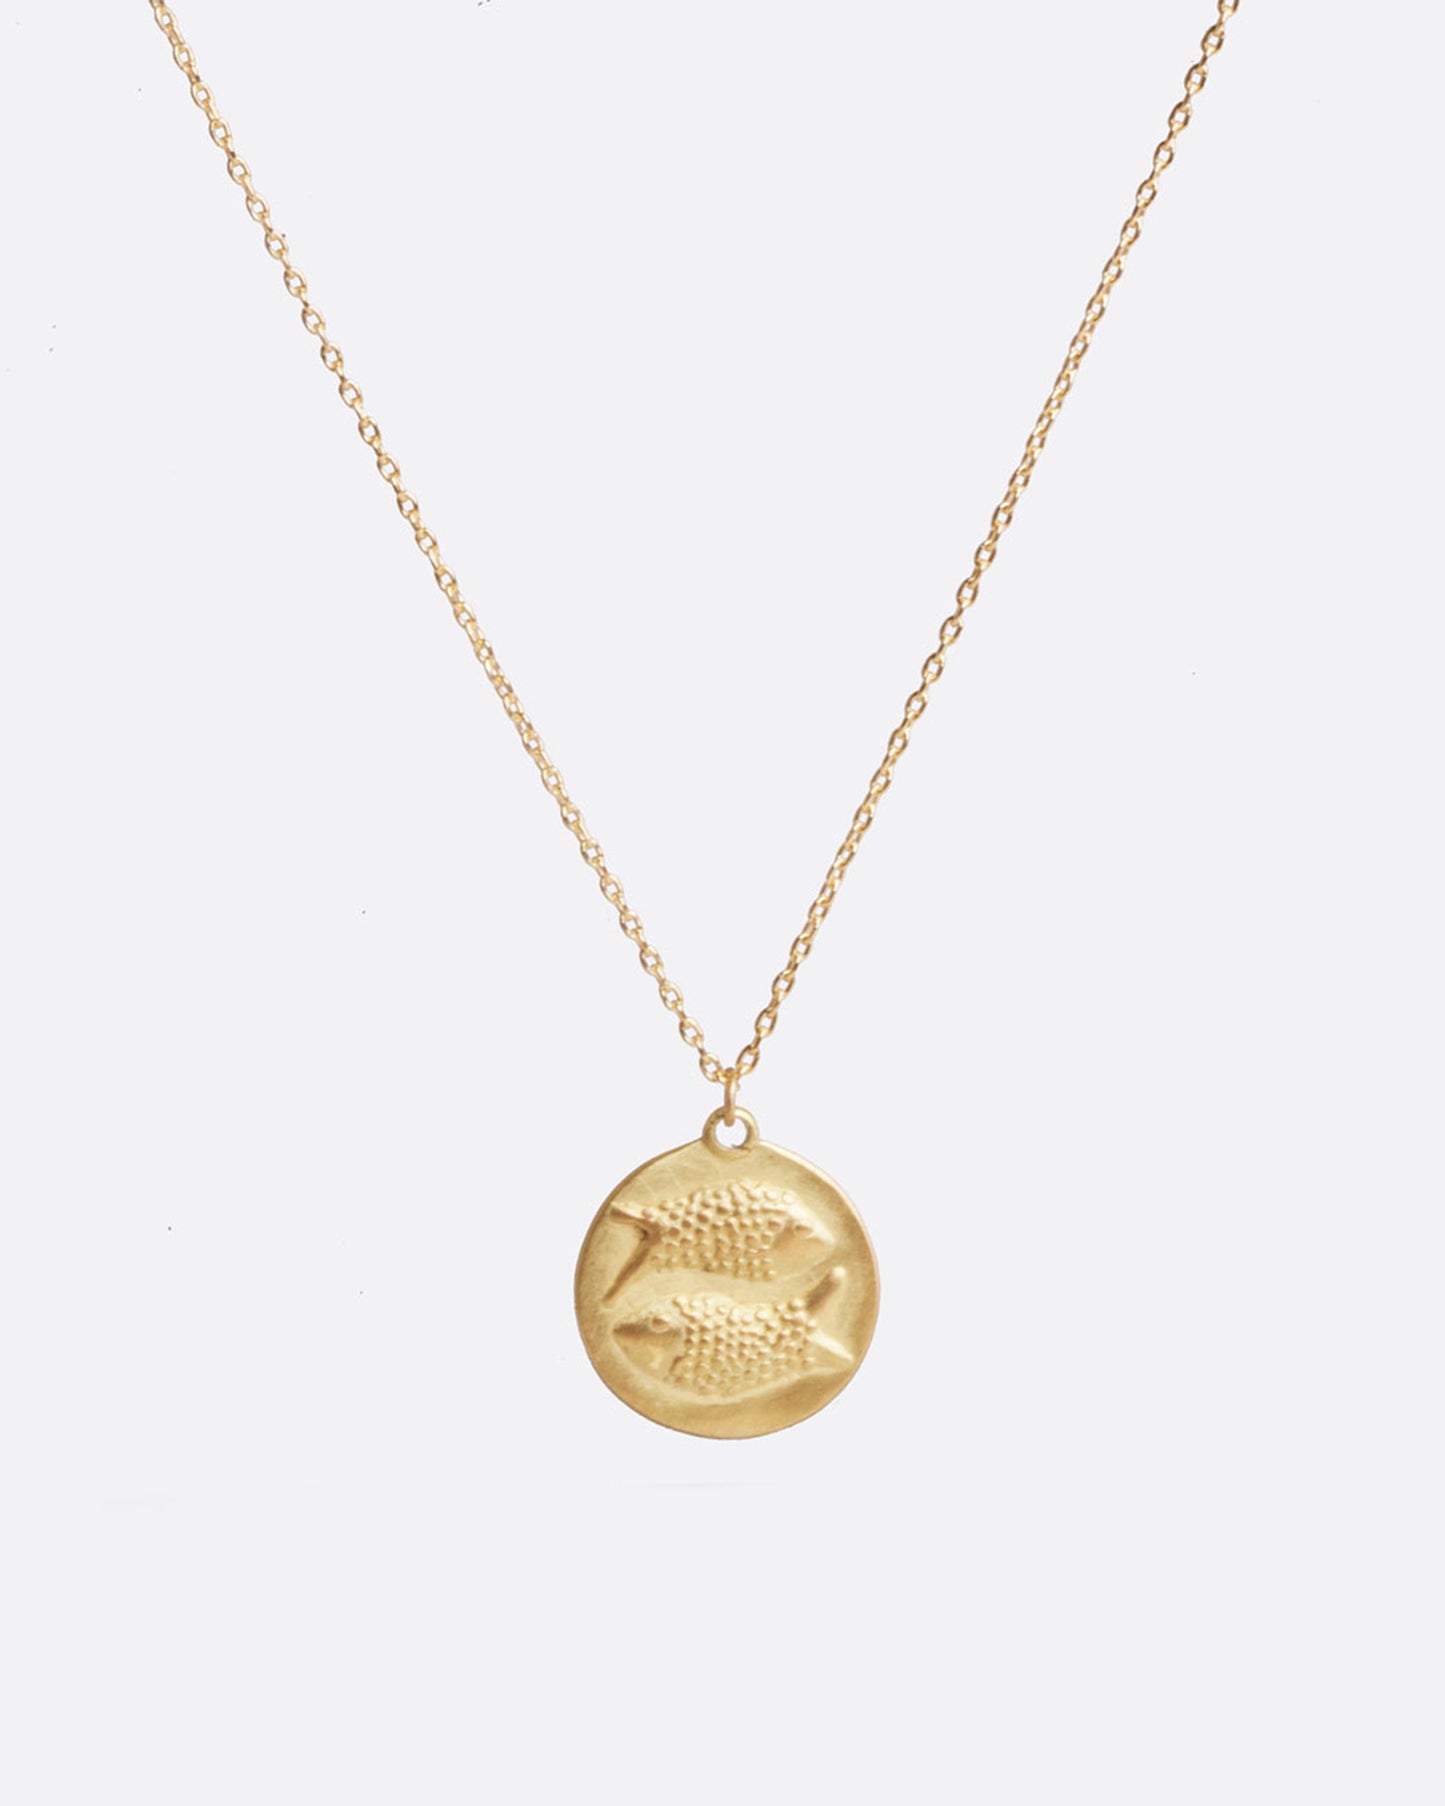 A yellow gold necklace with a round pendant with your choice of zodiac symbol.